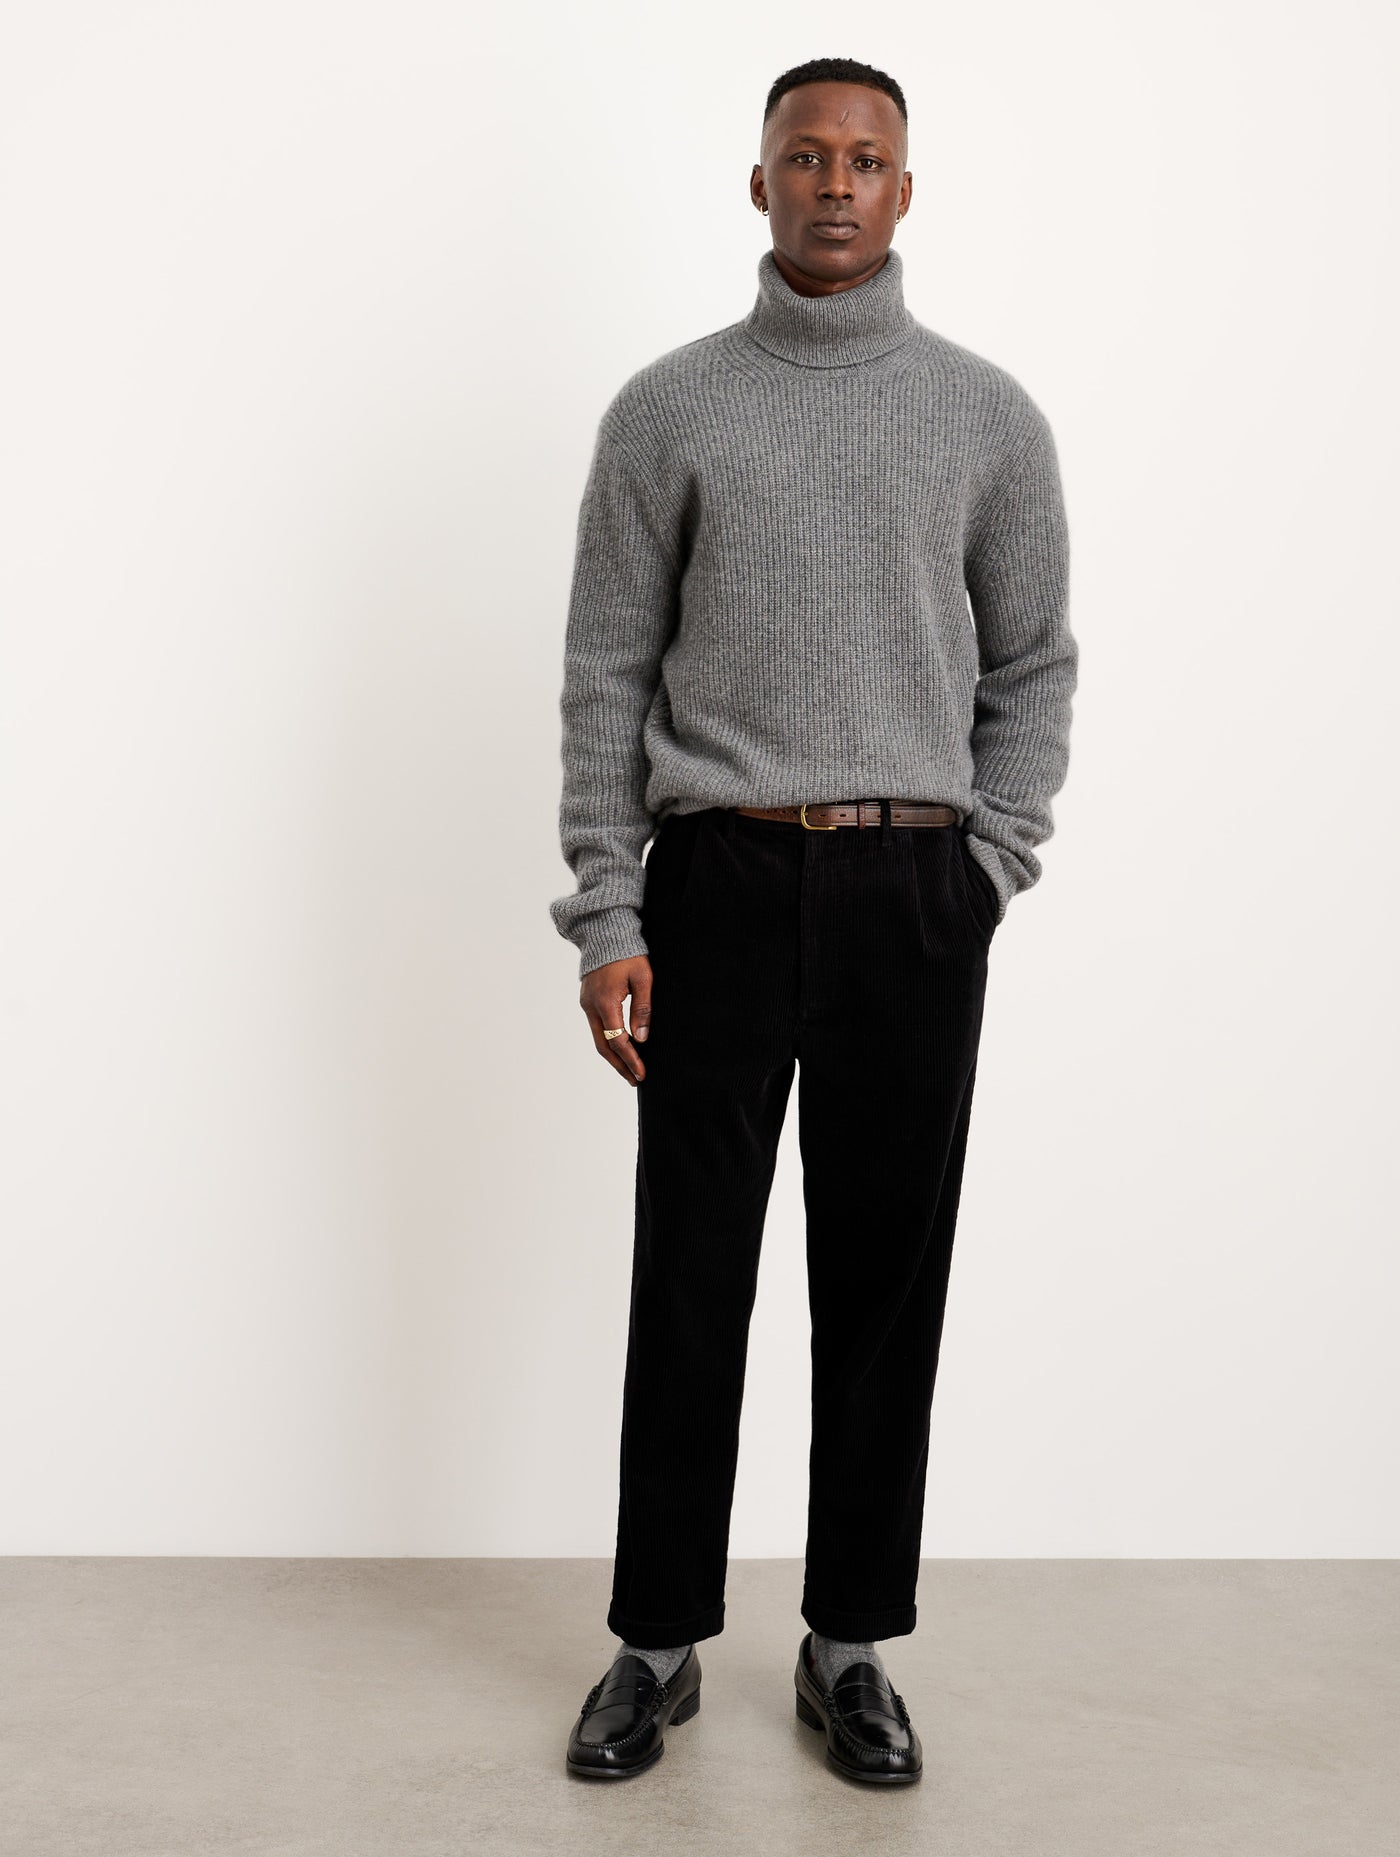 Standard Pleated Pant in Corduroy – Alex Mill